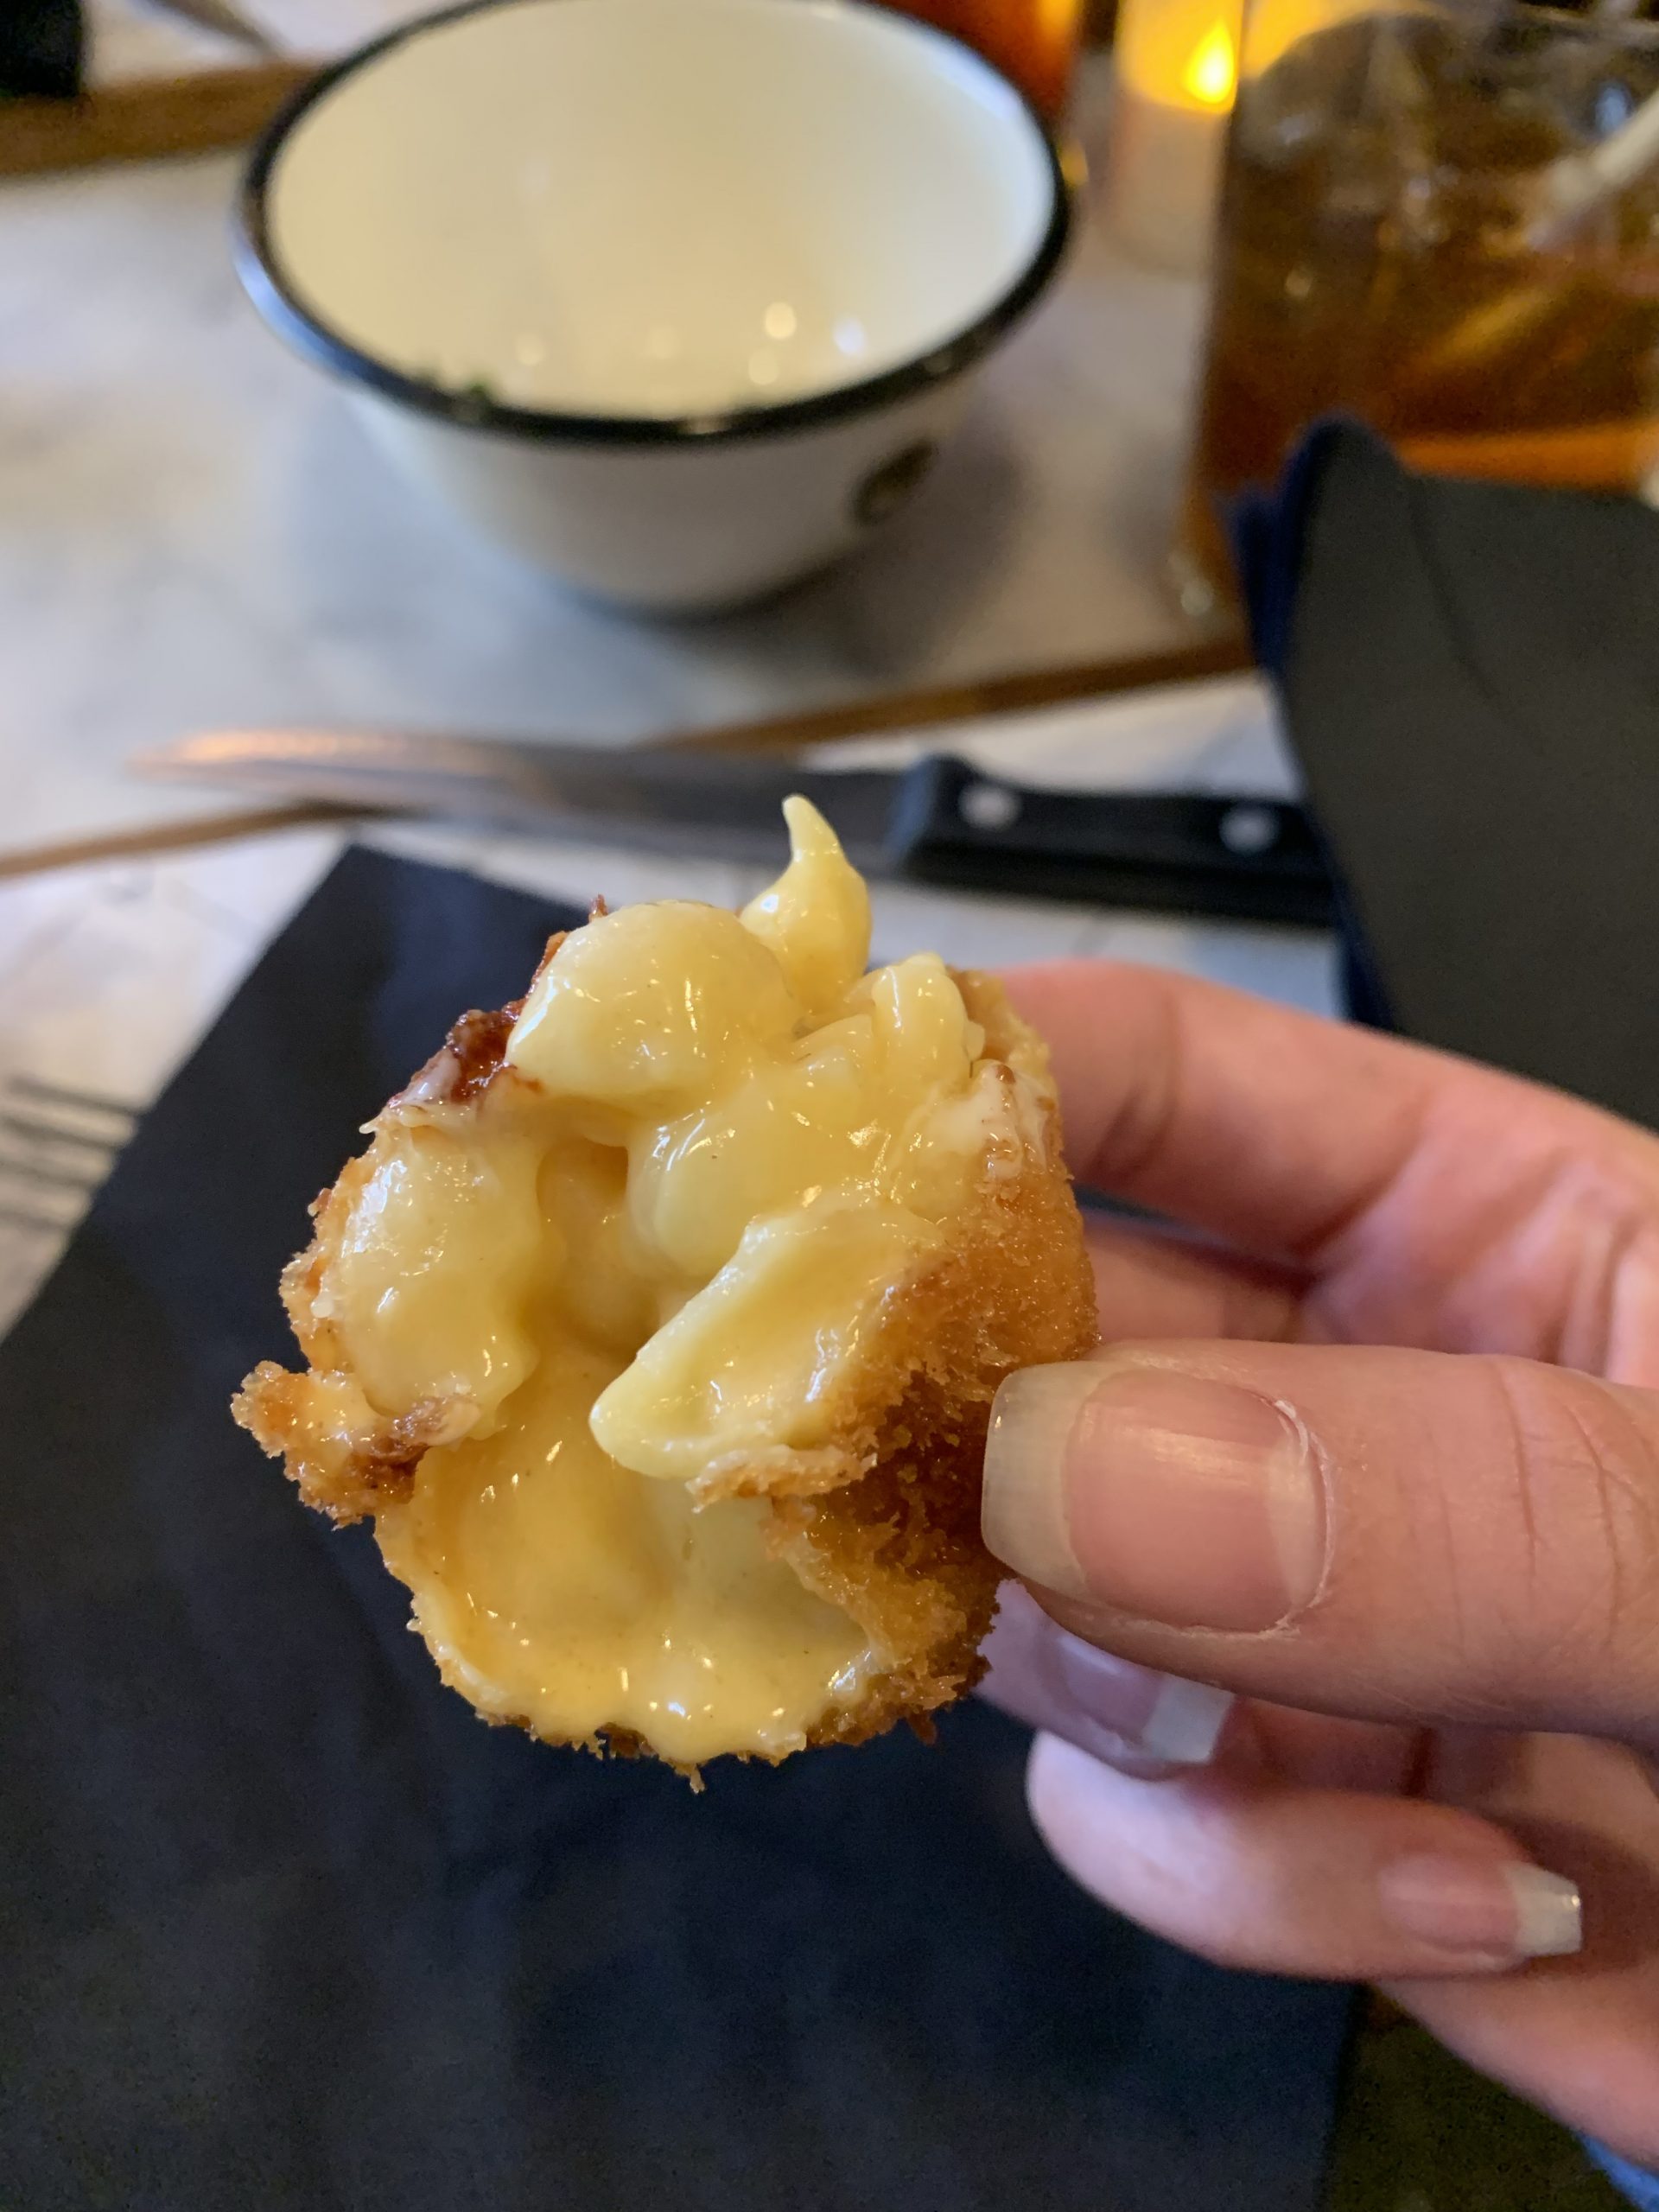 Mac and cheese balls - Bulls and dogs